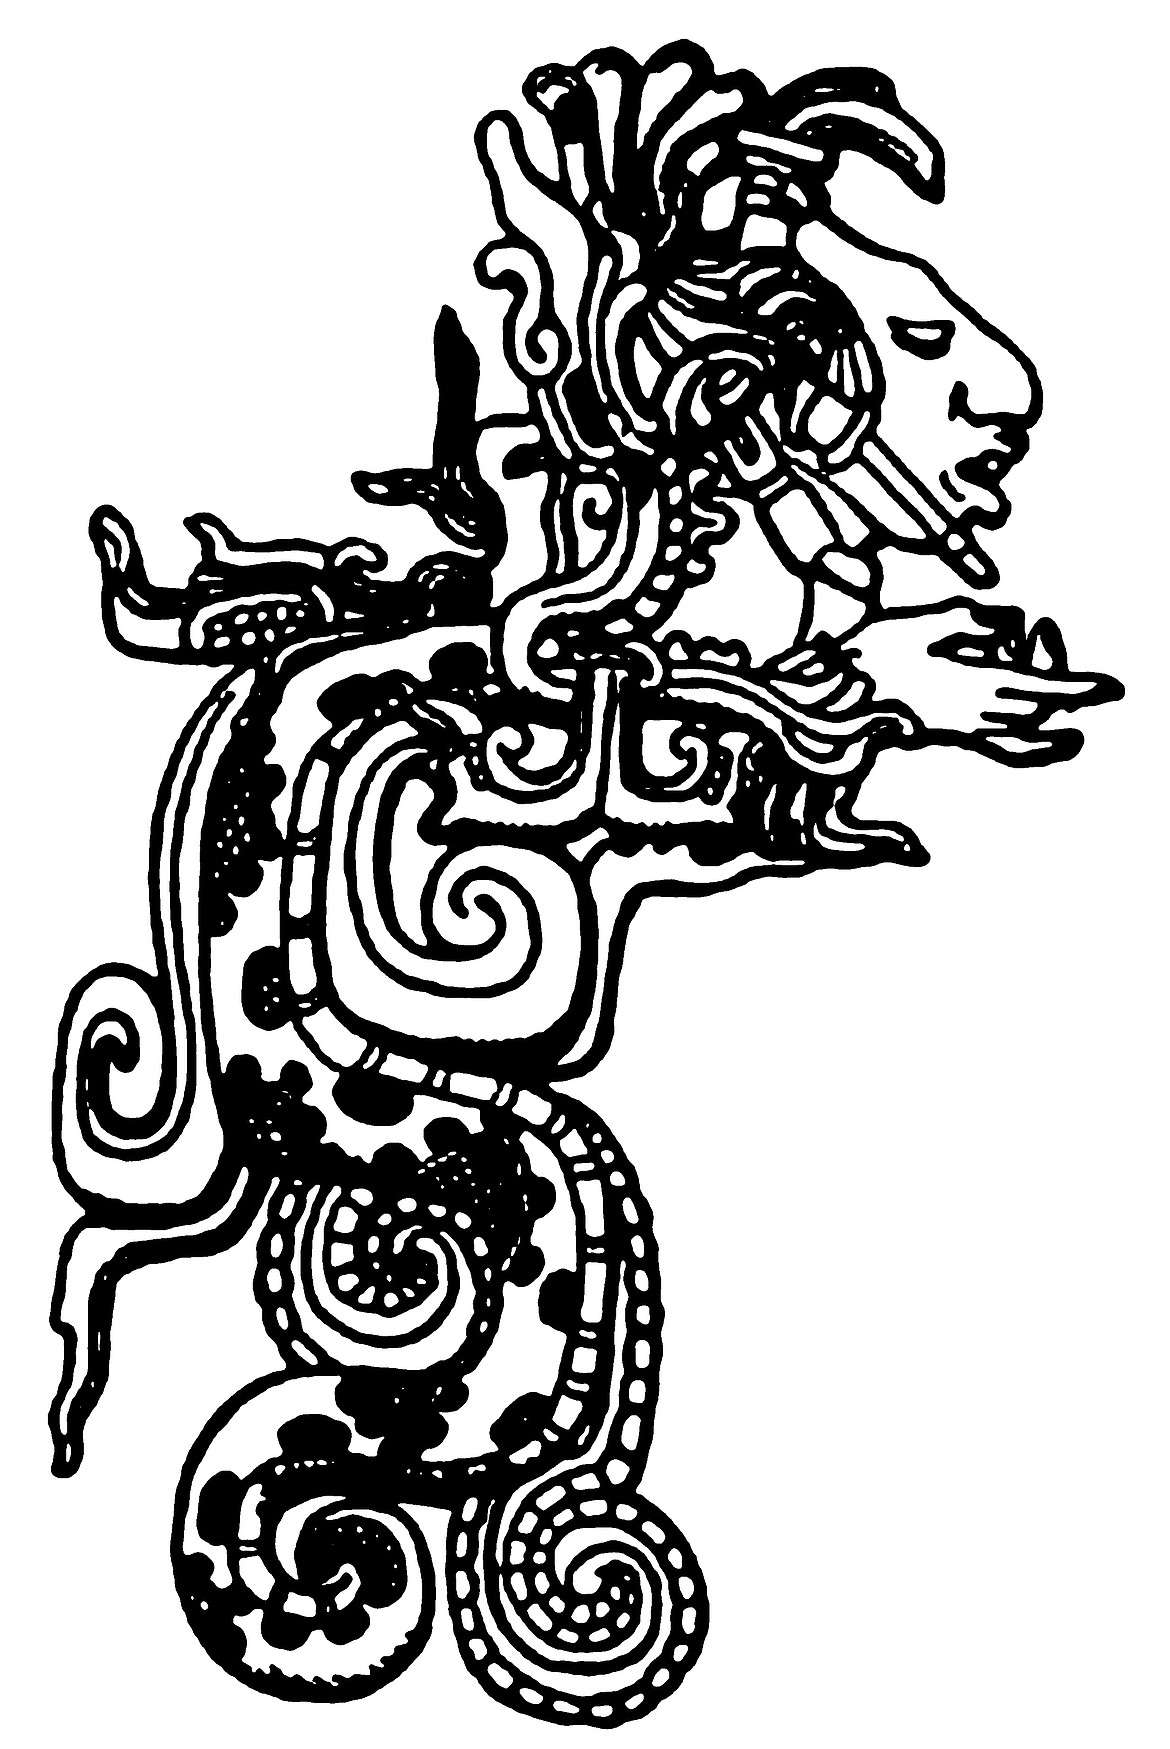 WIKIMEDIA COMMONS
The Mayan “dragon” Quetzalcoatl or “Kukulkan,” said to bring welcome rain to the living and death to evil people by devouring them, was worshipped since before the Spaniards arrived in North America.